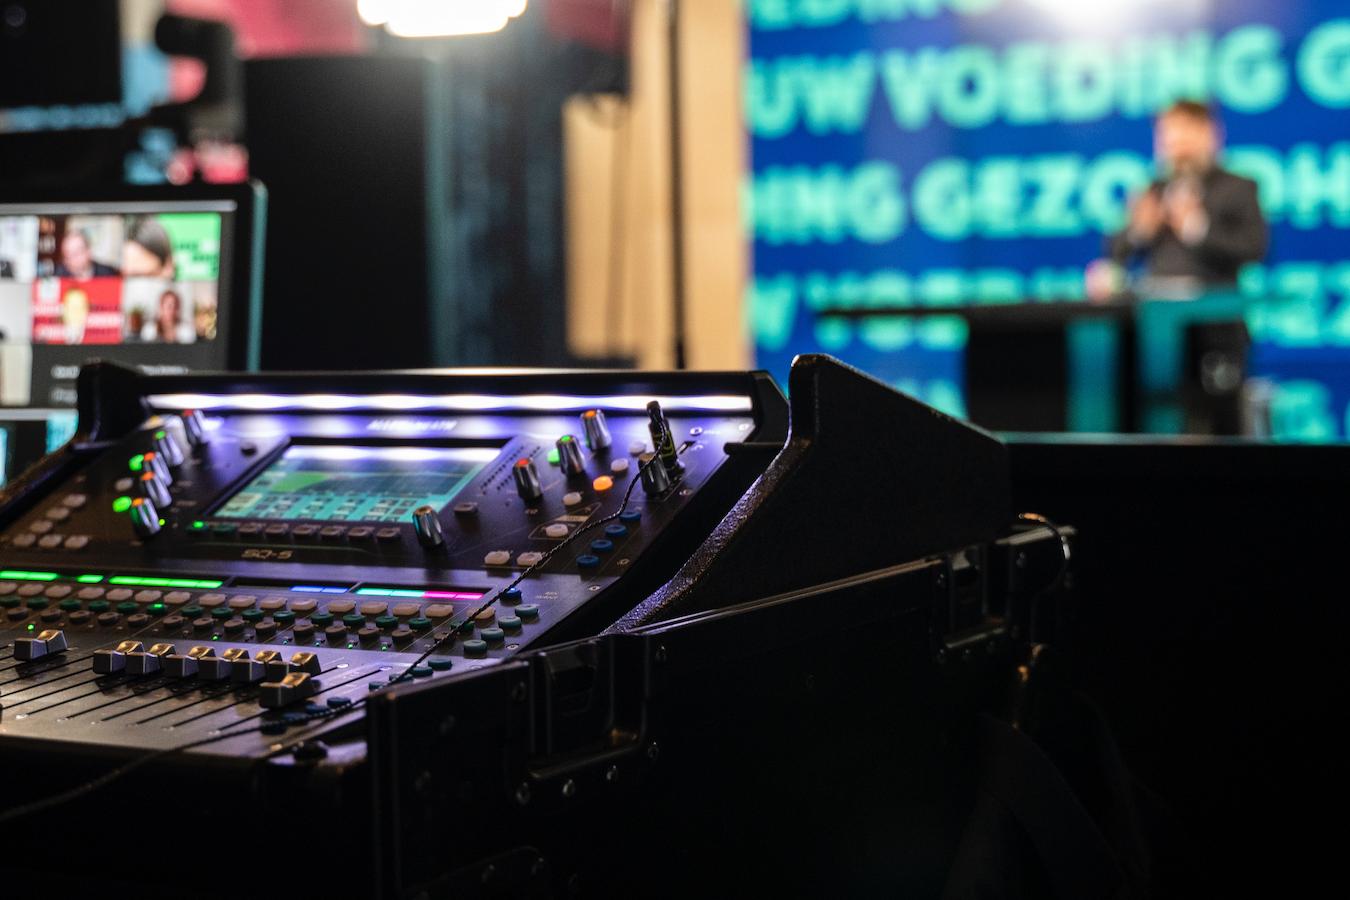 Mack Sennett Studios can help your event create buzz and hype with a live stream that has clear audio and can be easily shared across event websites stream websites and more